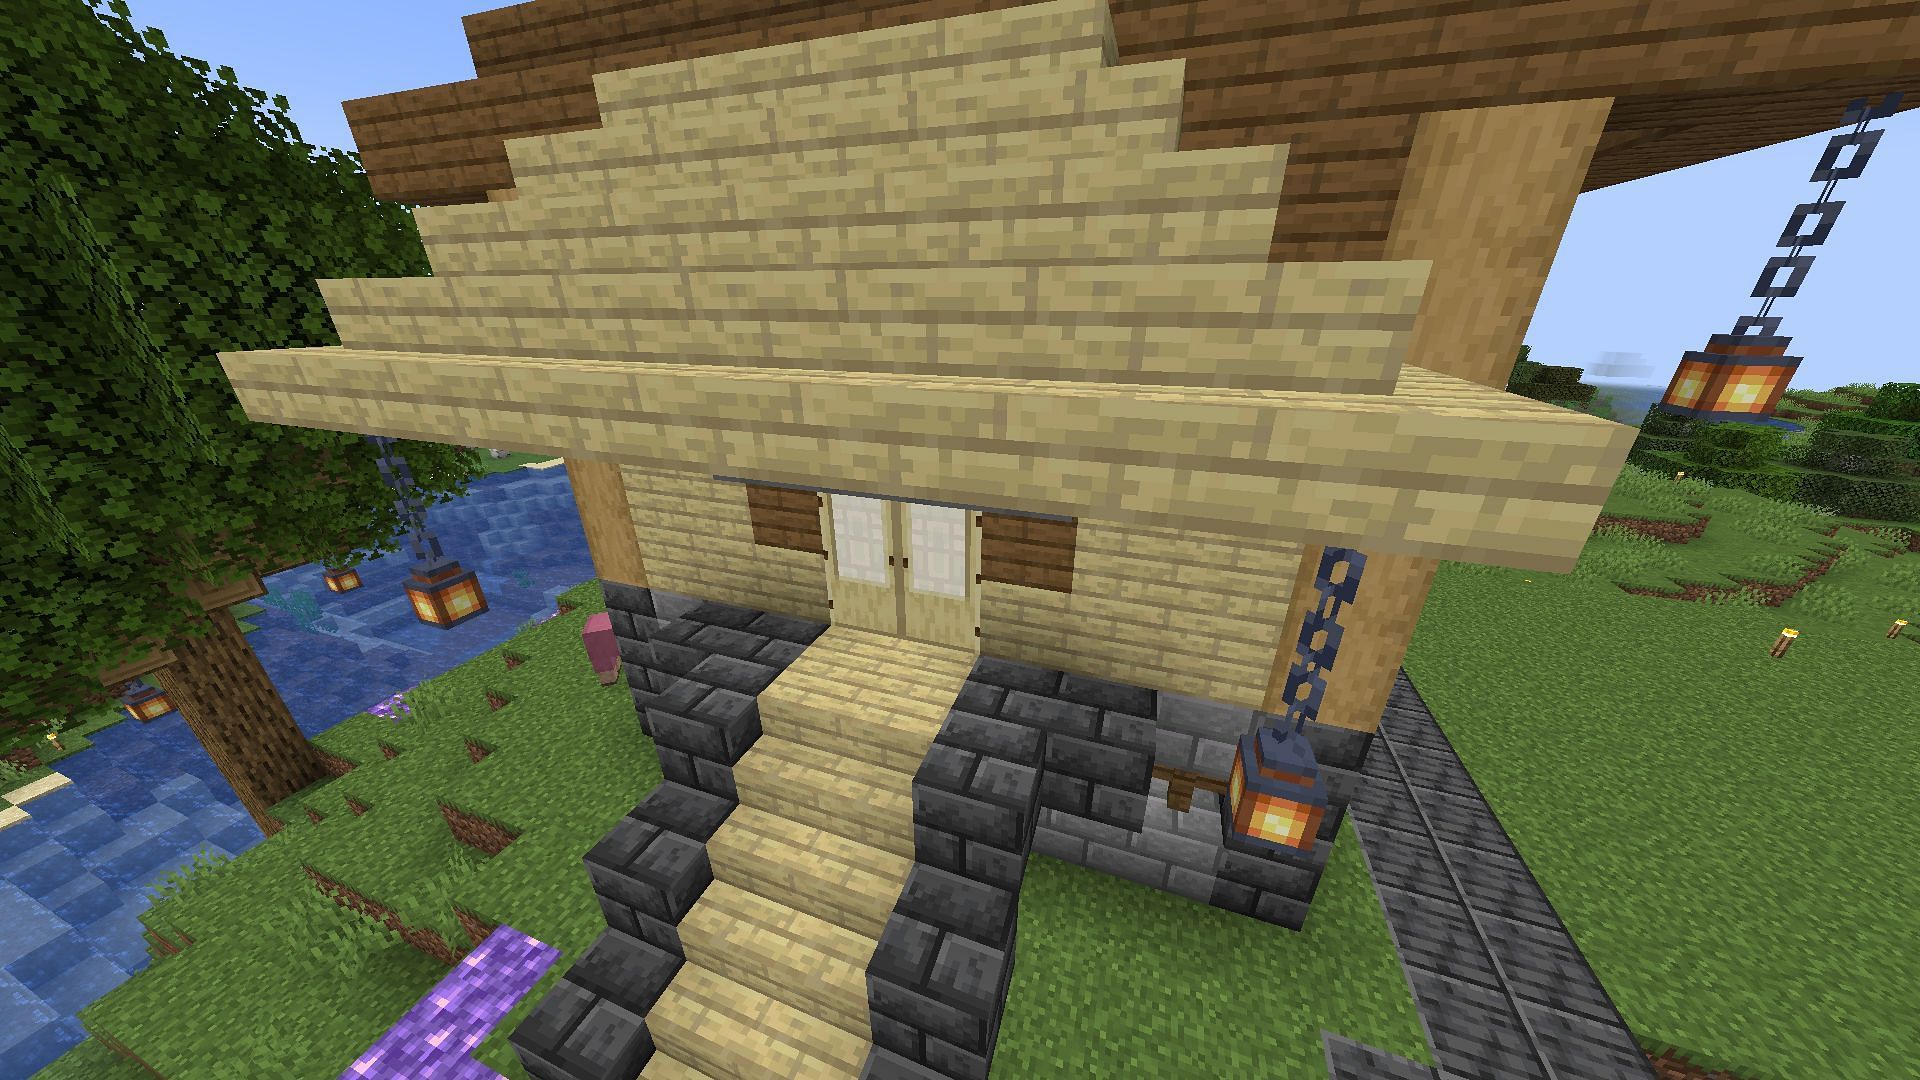 Stairs can also act as a gradual roof in Minecraft (Image via Mojang)